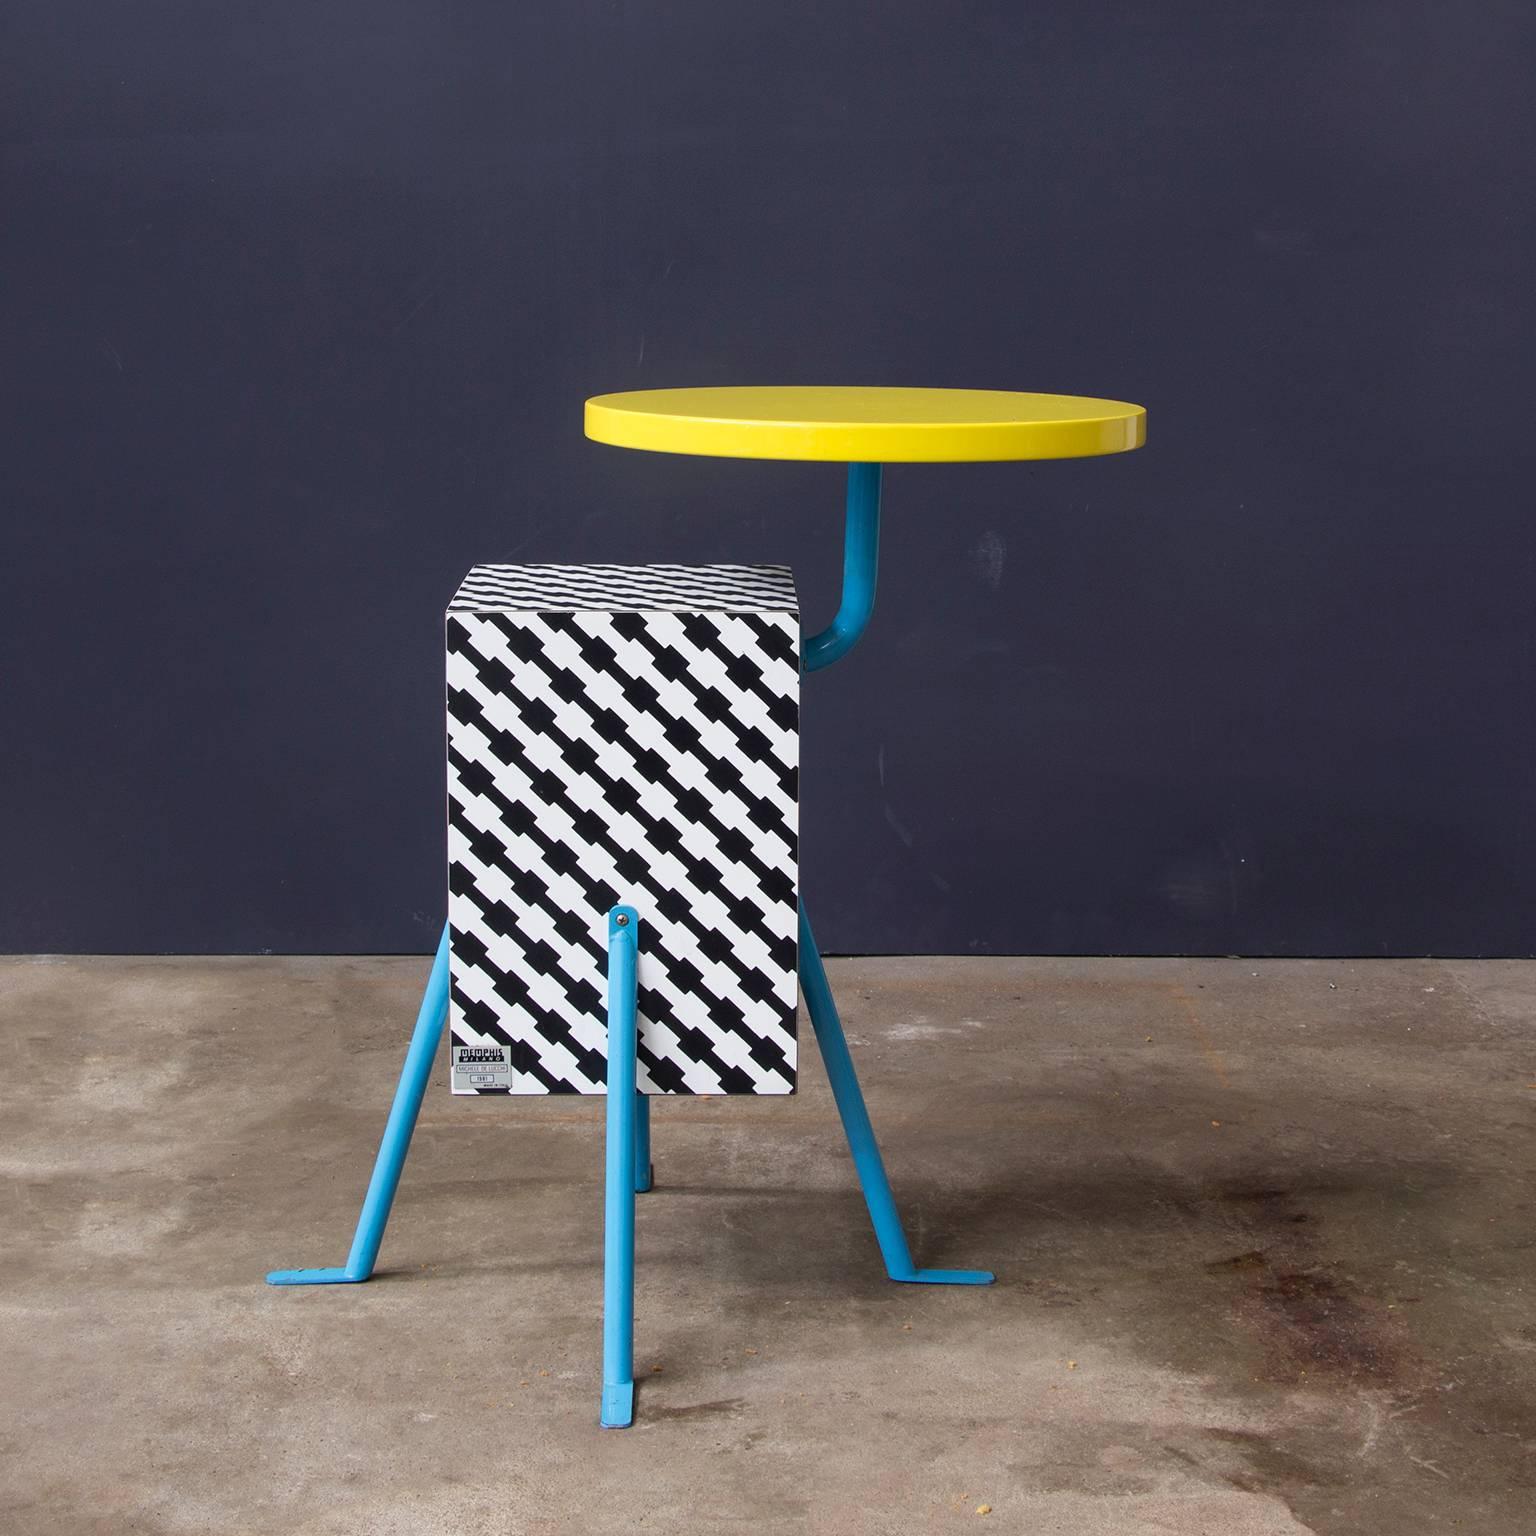 From the inaugural 1981 Memphis collection, this very popular design by Michele de Lucchi (one of the founding members of the design collective) implements a de Lucchi laminate design named "Terrific".
Beneath its bright yellow lacquered